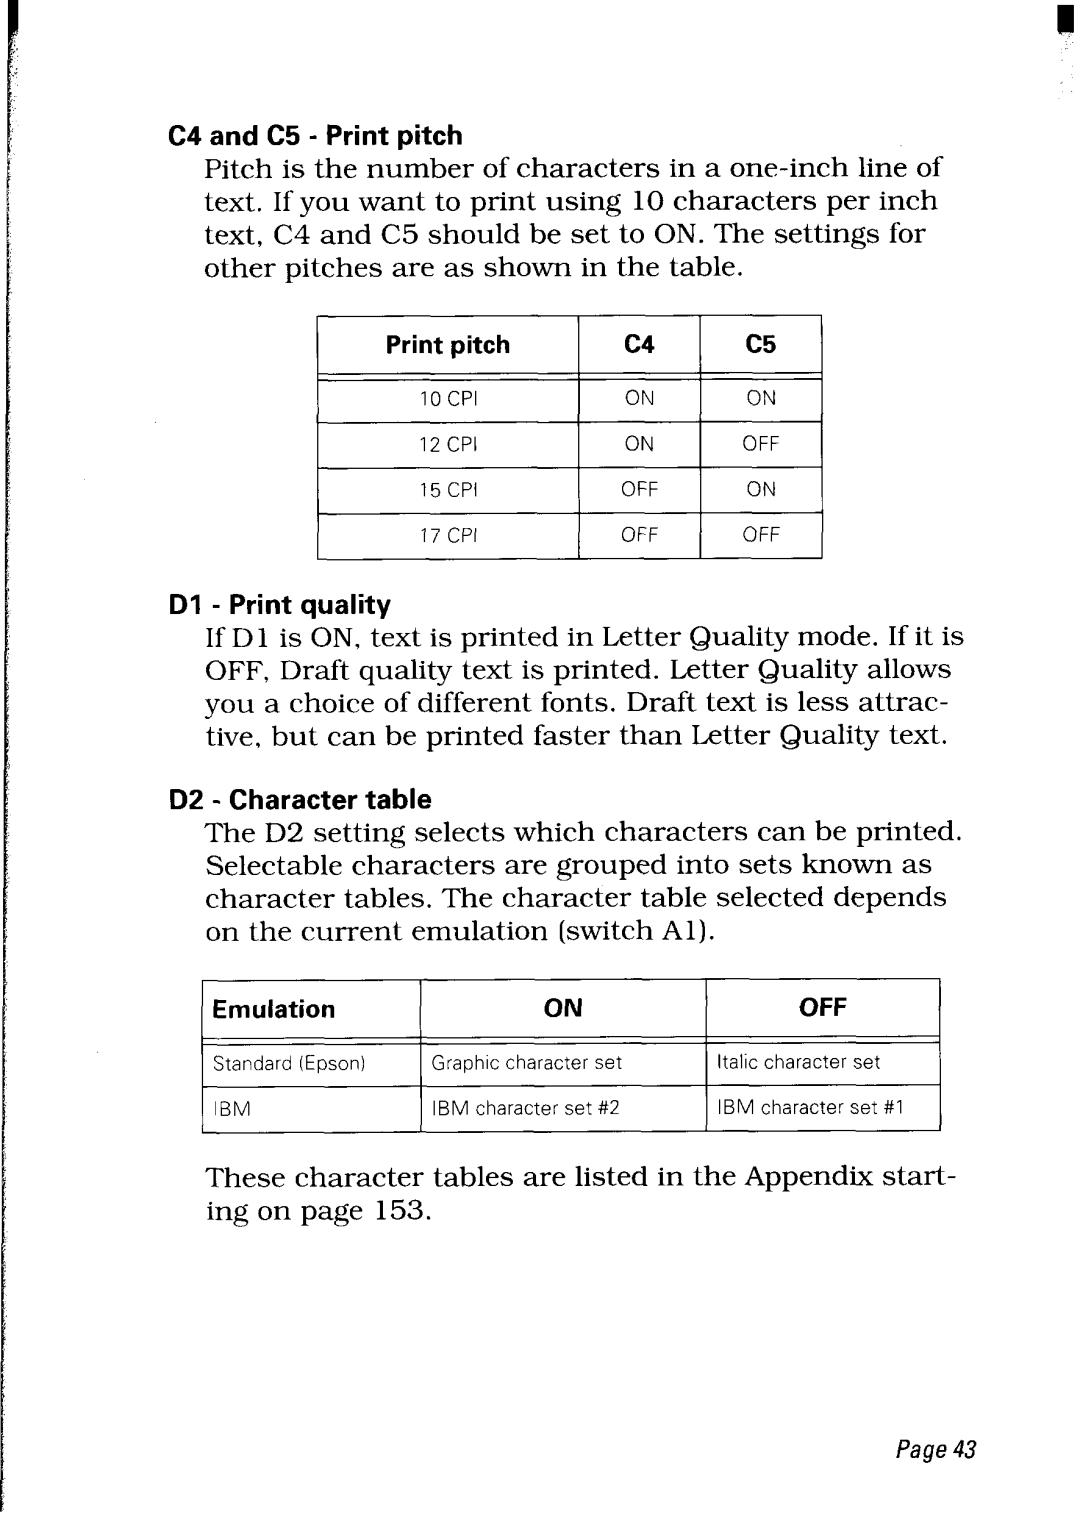 Star Micronics LC24-30 user manual C4 and C5 - Print pitch, Dl - Print quality, D2 - Character table, Emulation 